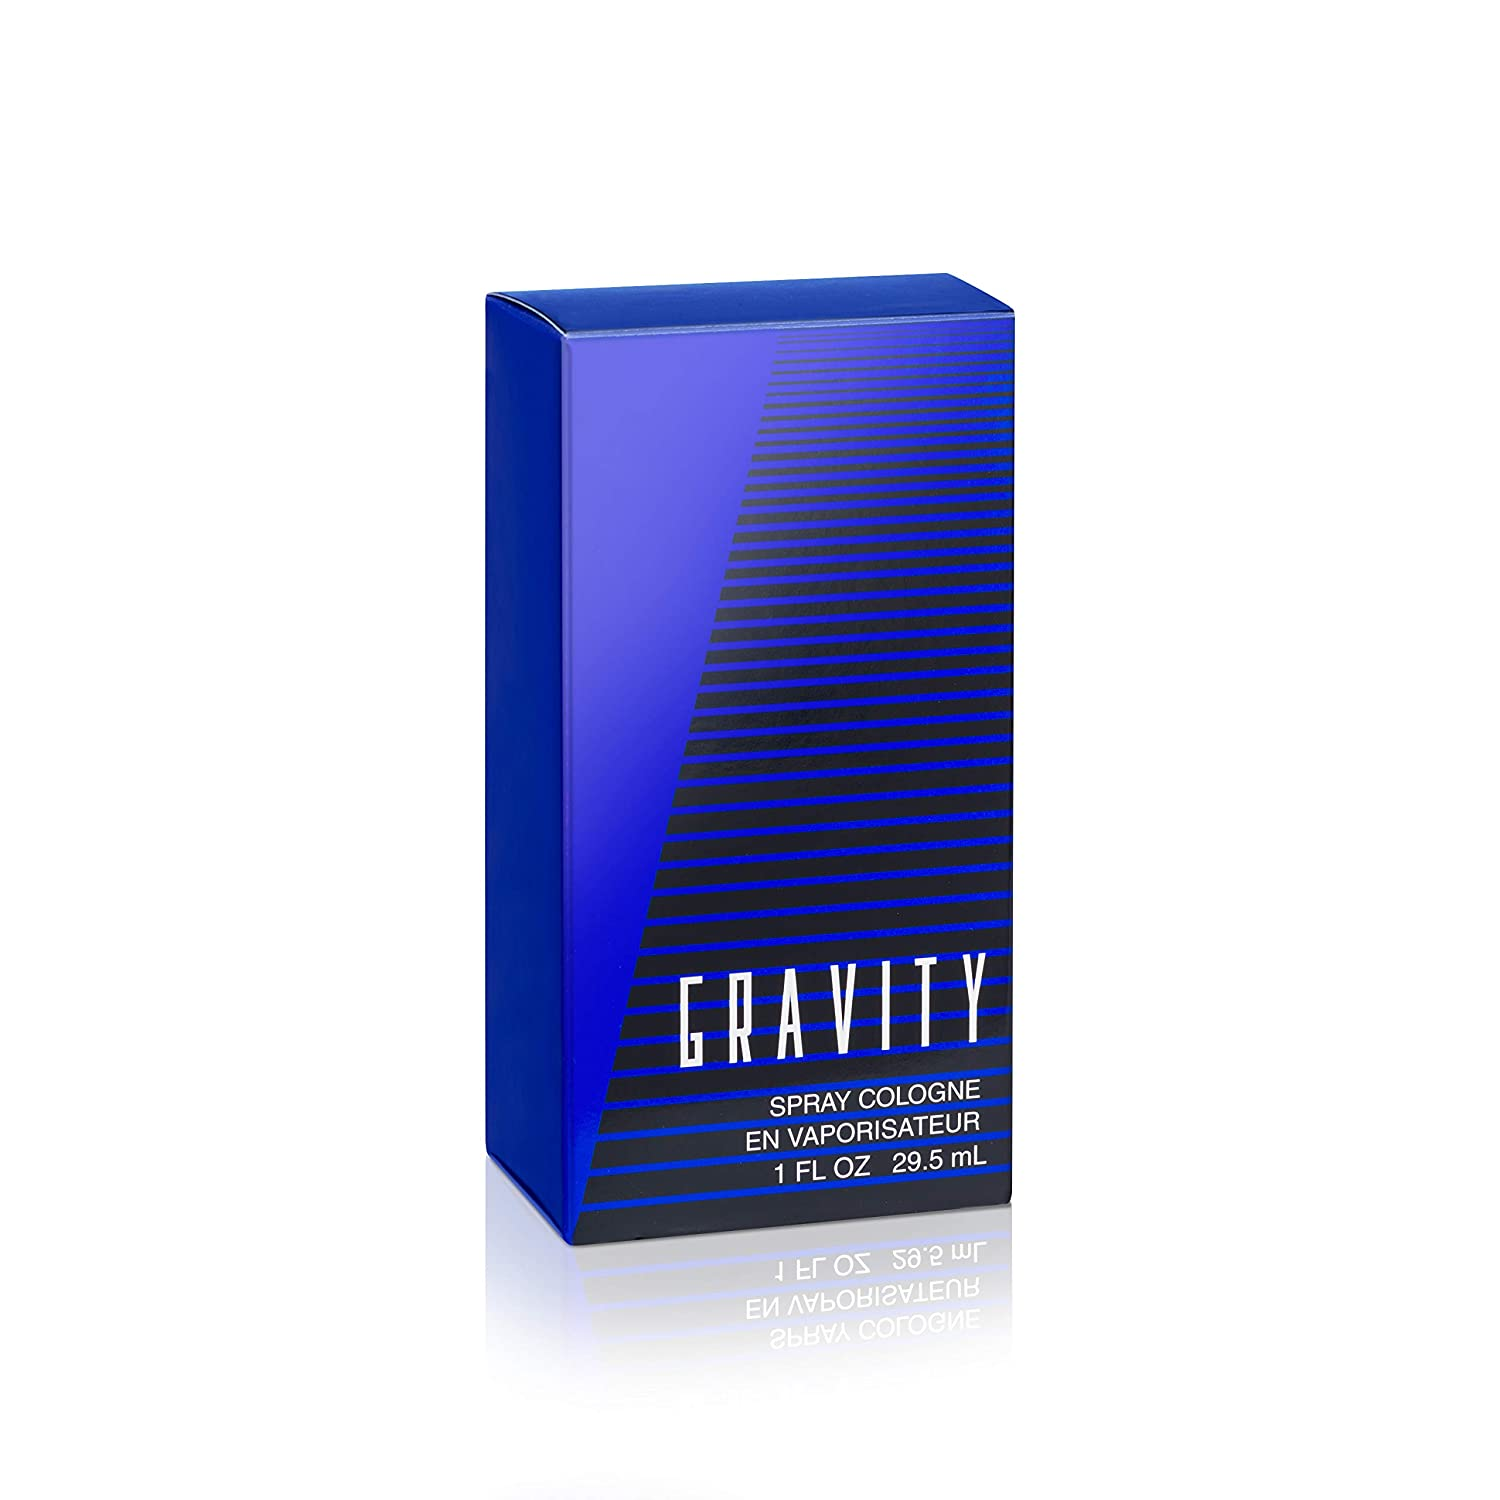 Gravity by Coty for Men. Cologne Spray, 1-Ounce